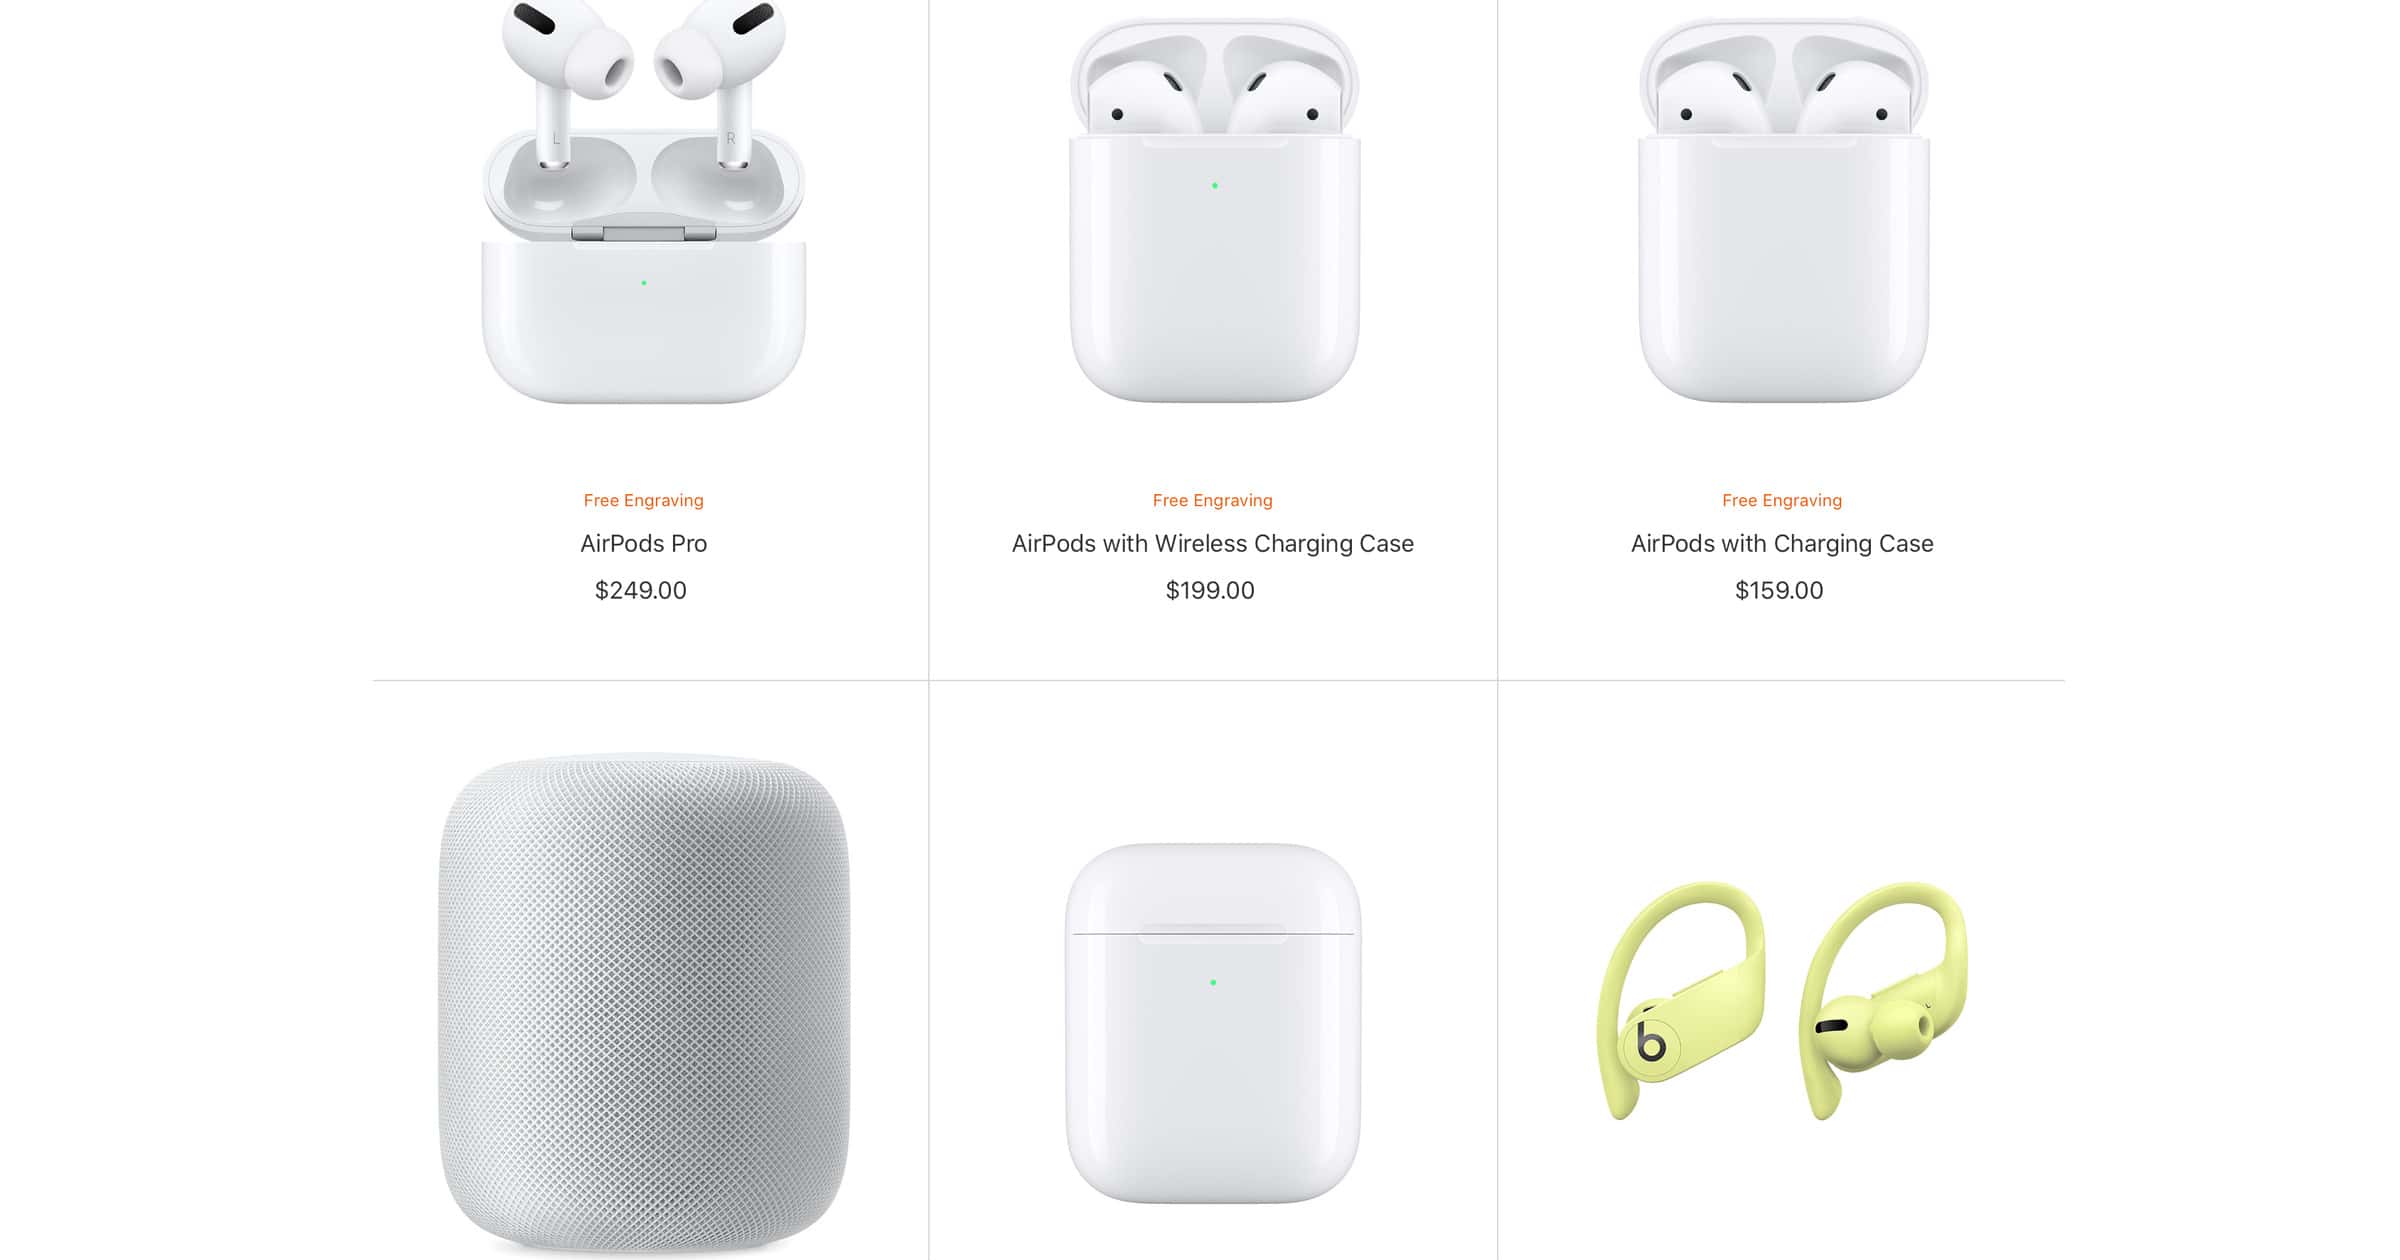 Apple Stops Selling Earphones and Speakers From Rivals Ahead of Expected New Product Launches